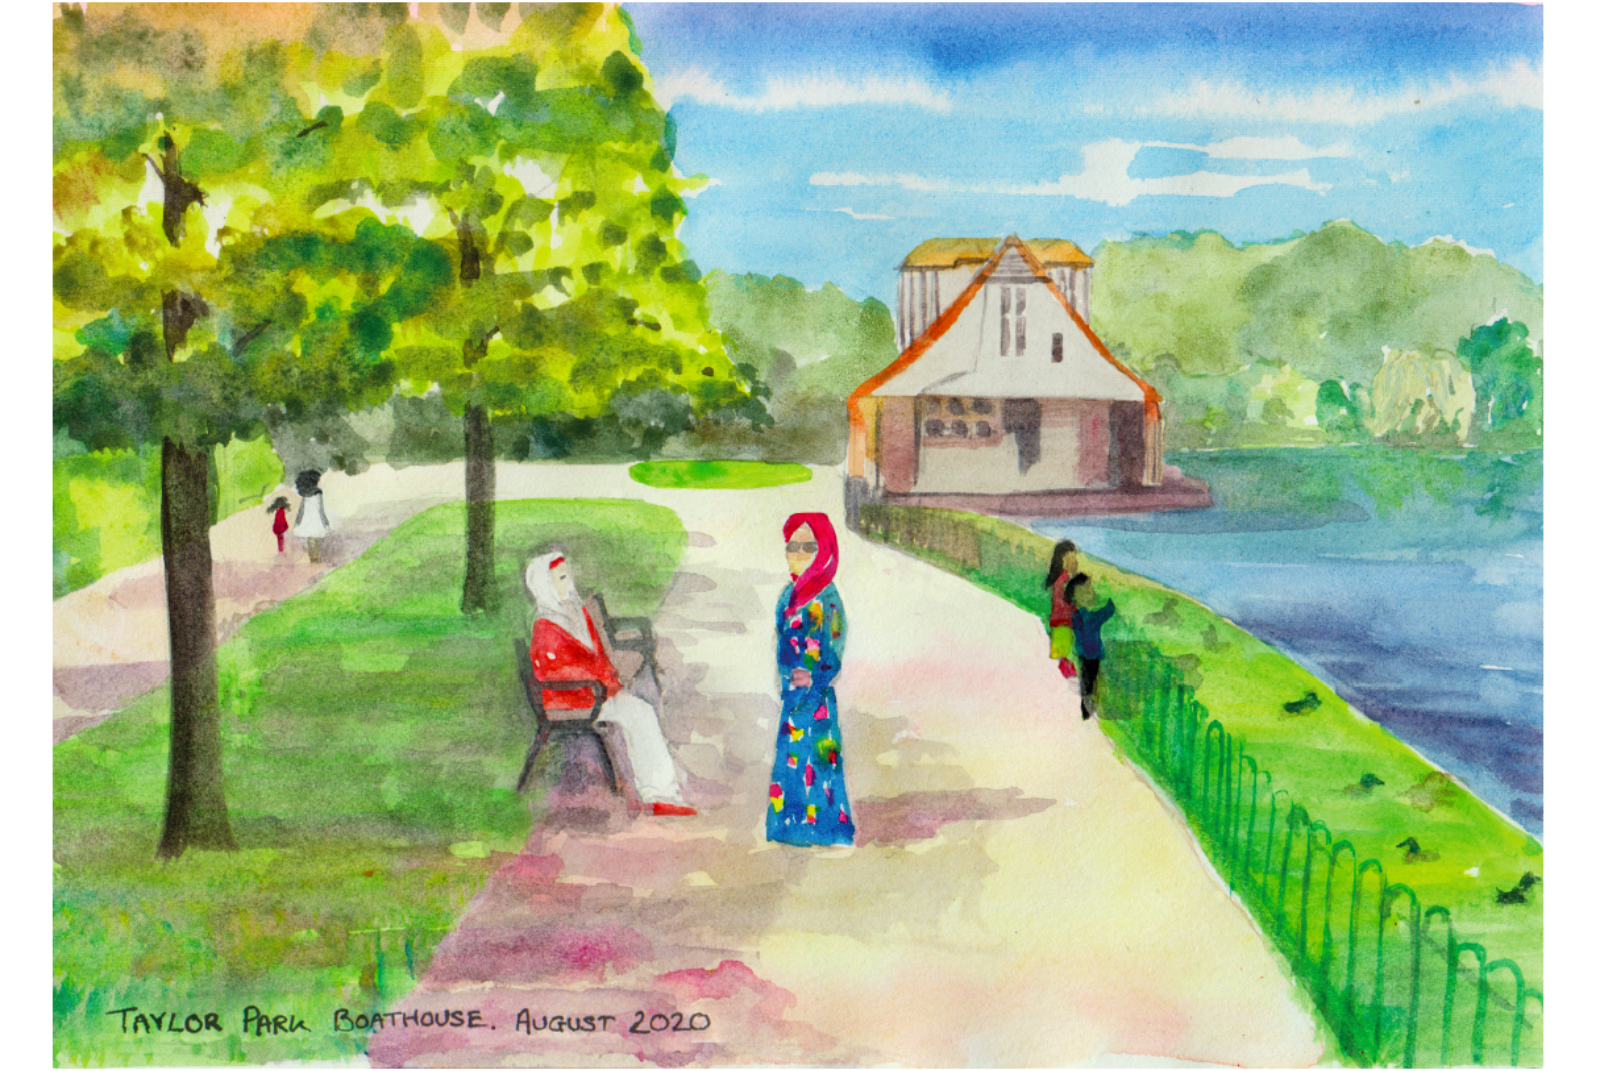 A watercolour painting of two people in a park next to a lake.